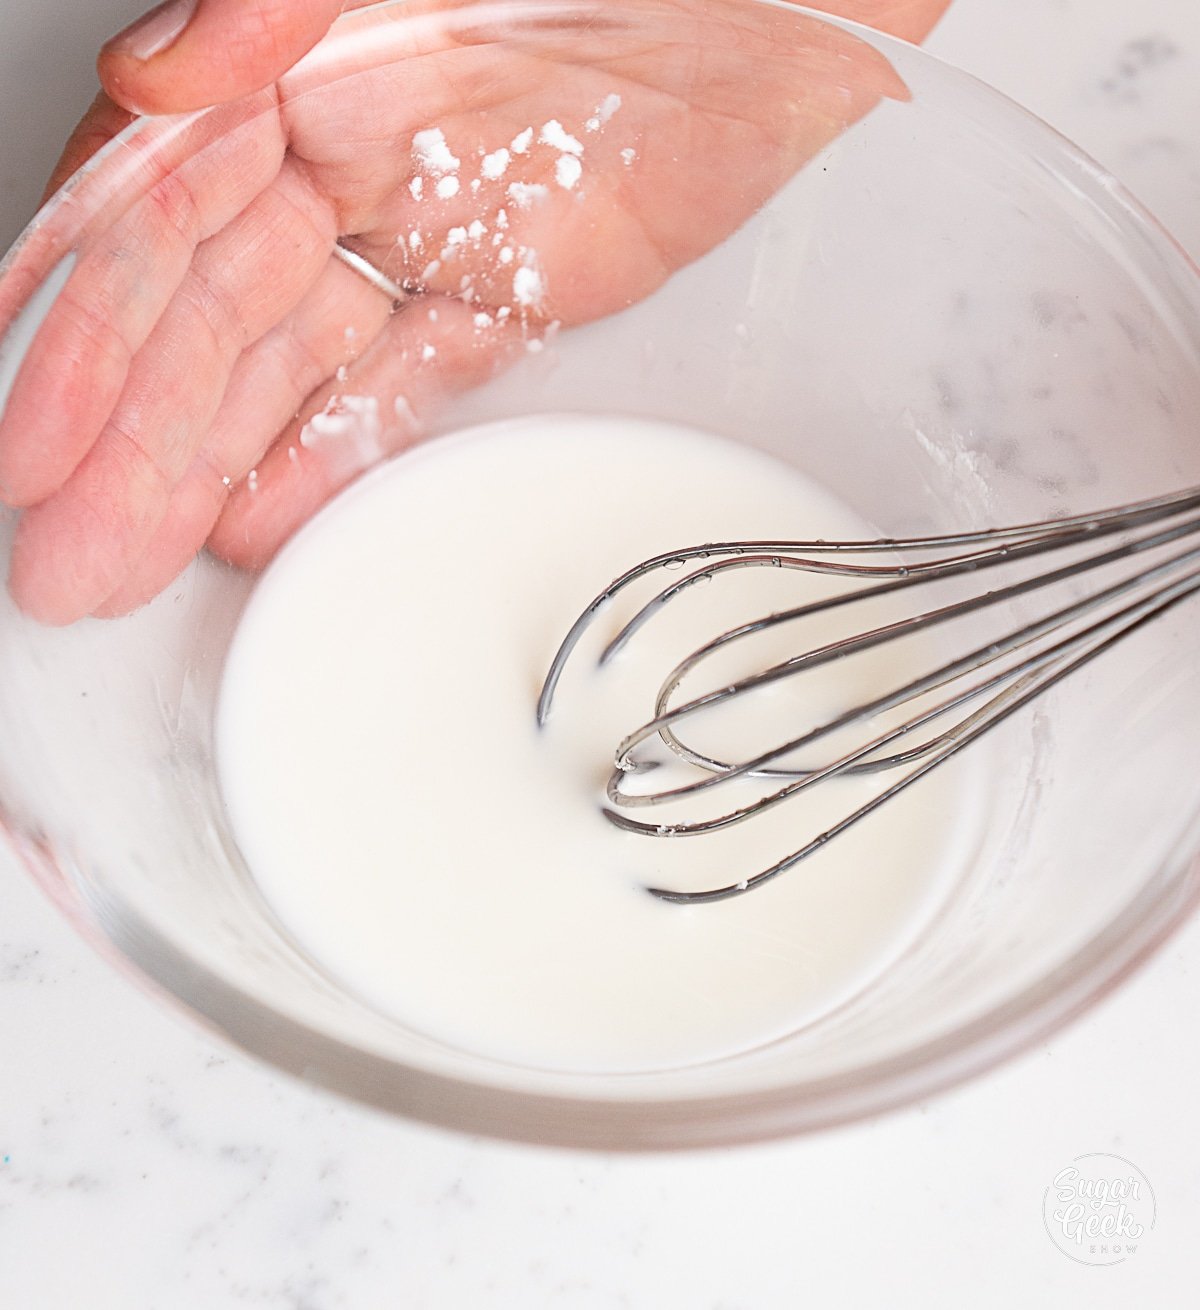 hands whisking water and cornstarch together.